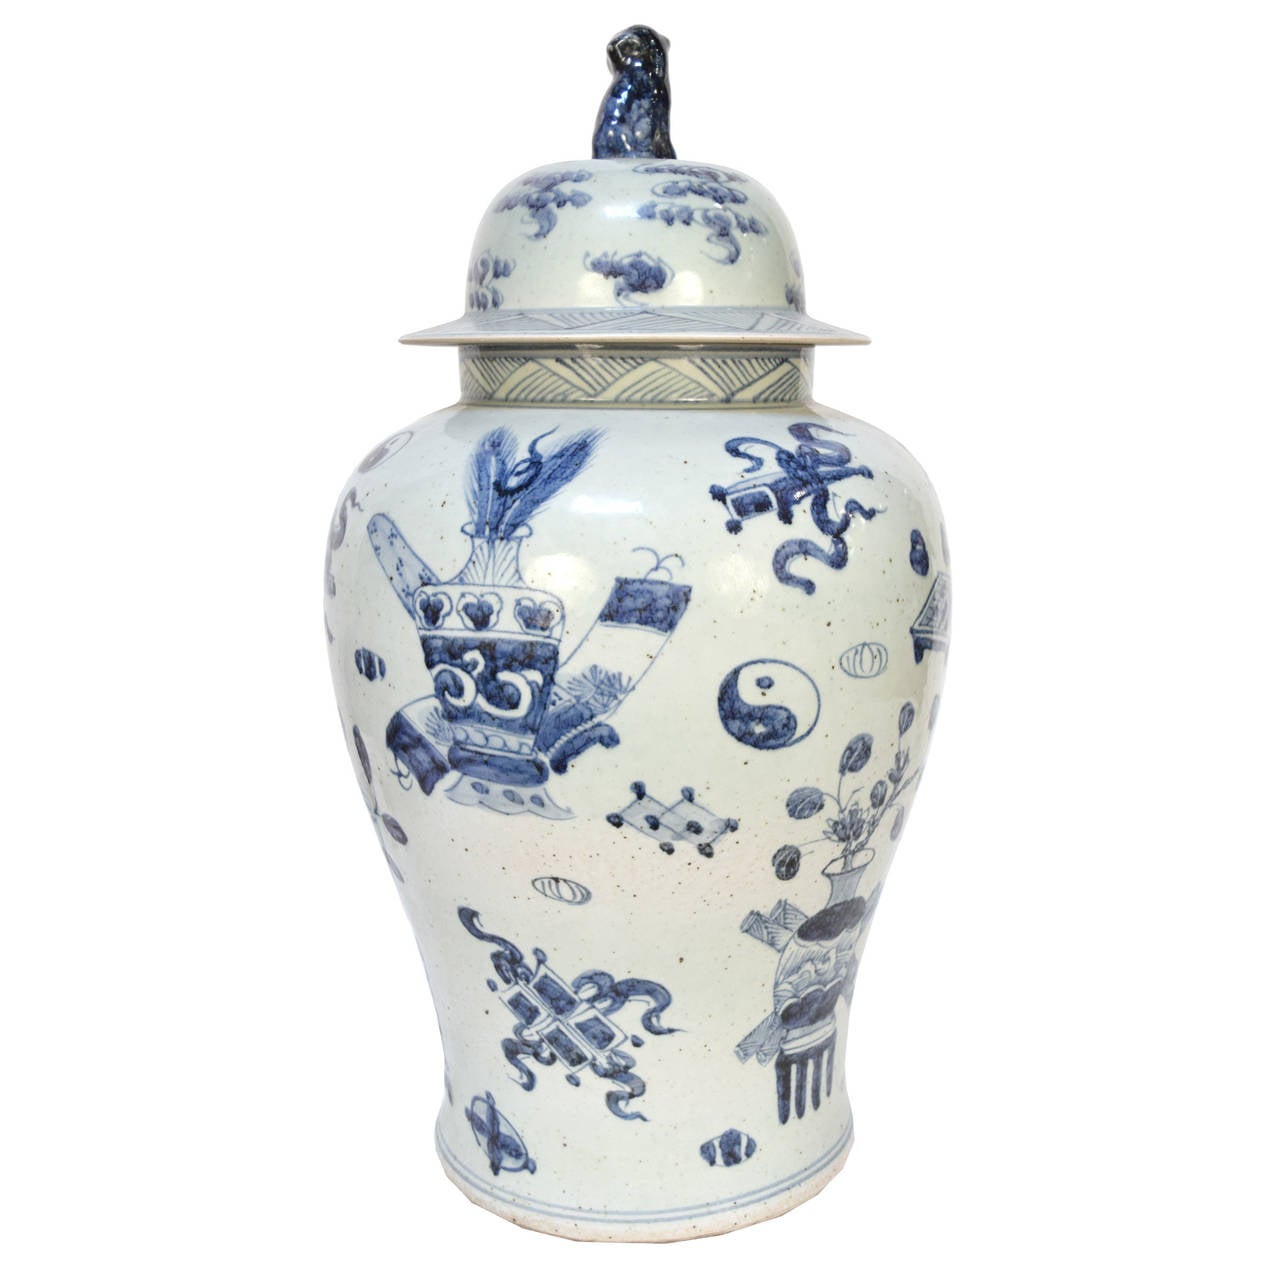 Chinese Blue and White Jar with Scholar's Objects